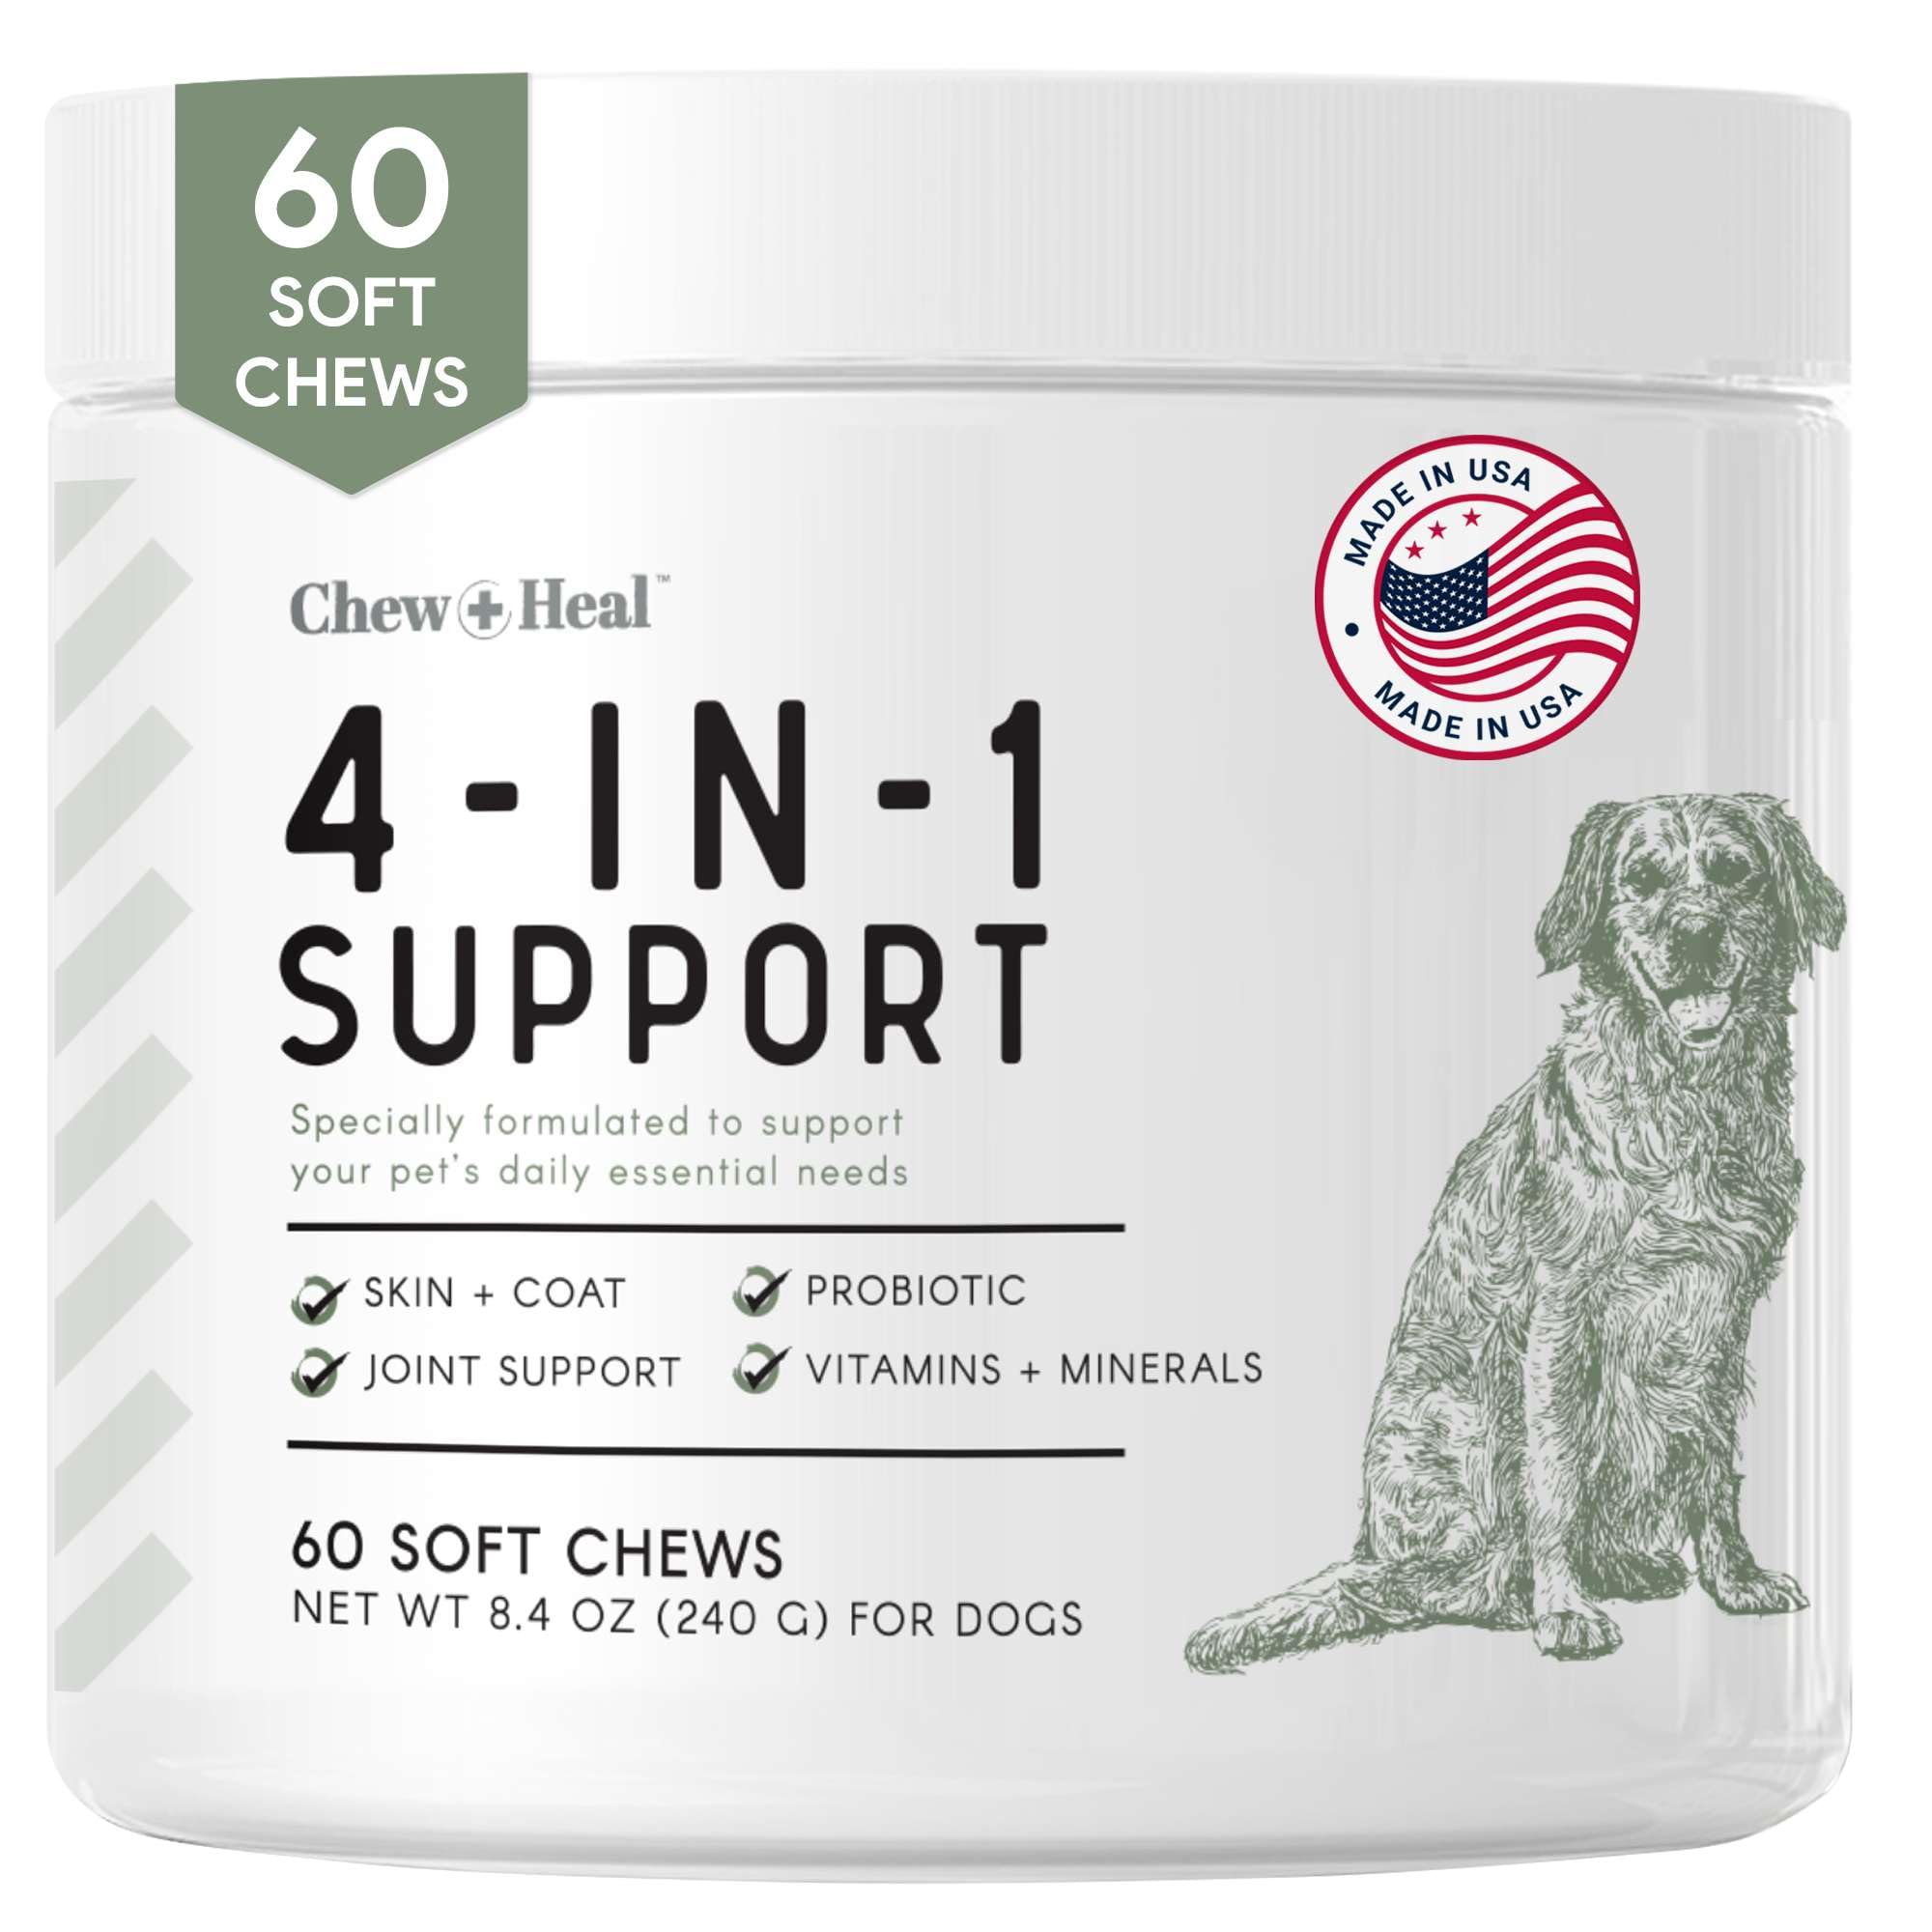 Chew + Heal All in 1 Dog Vitamin - Soft Chew Treats - Chewable Multivitamin with Probiotics, Digestive Enzymes, for Skin and Coat, Hip and Joint Support - with Omega, Calcium - Made in The USA